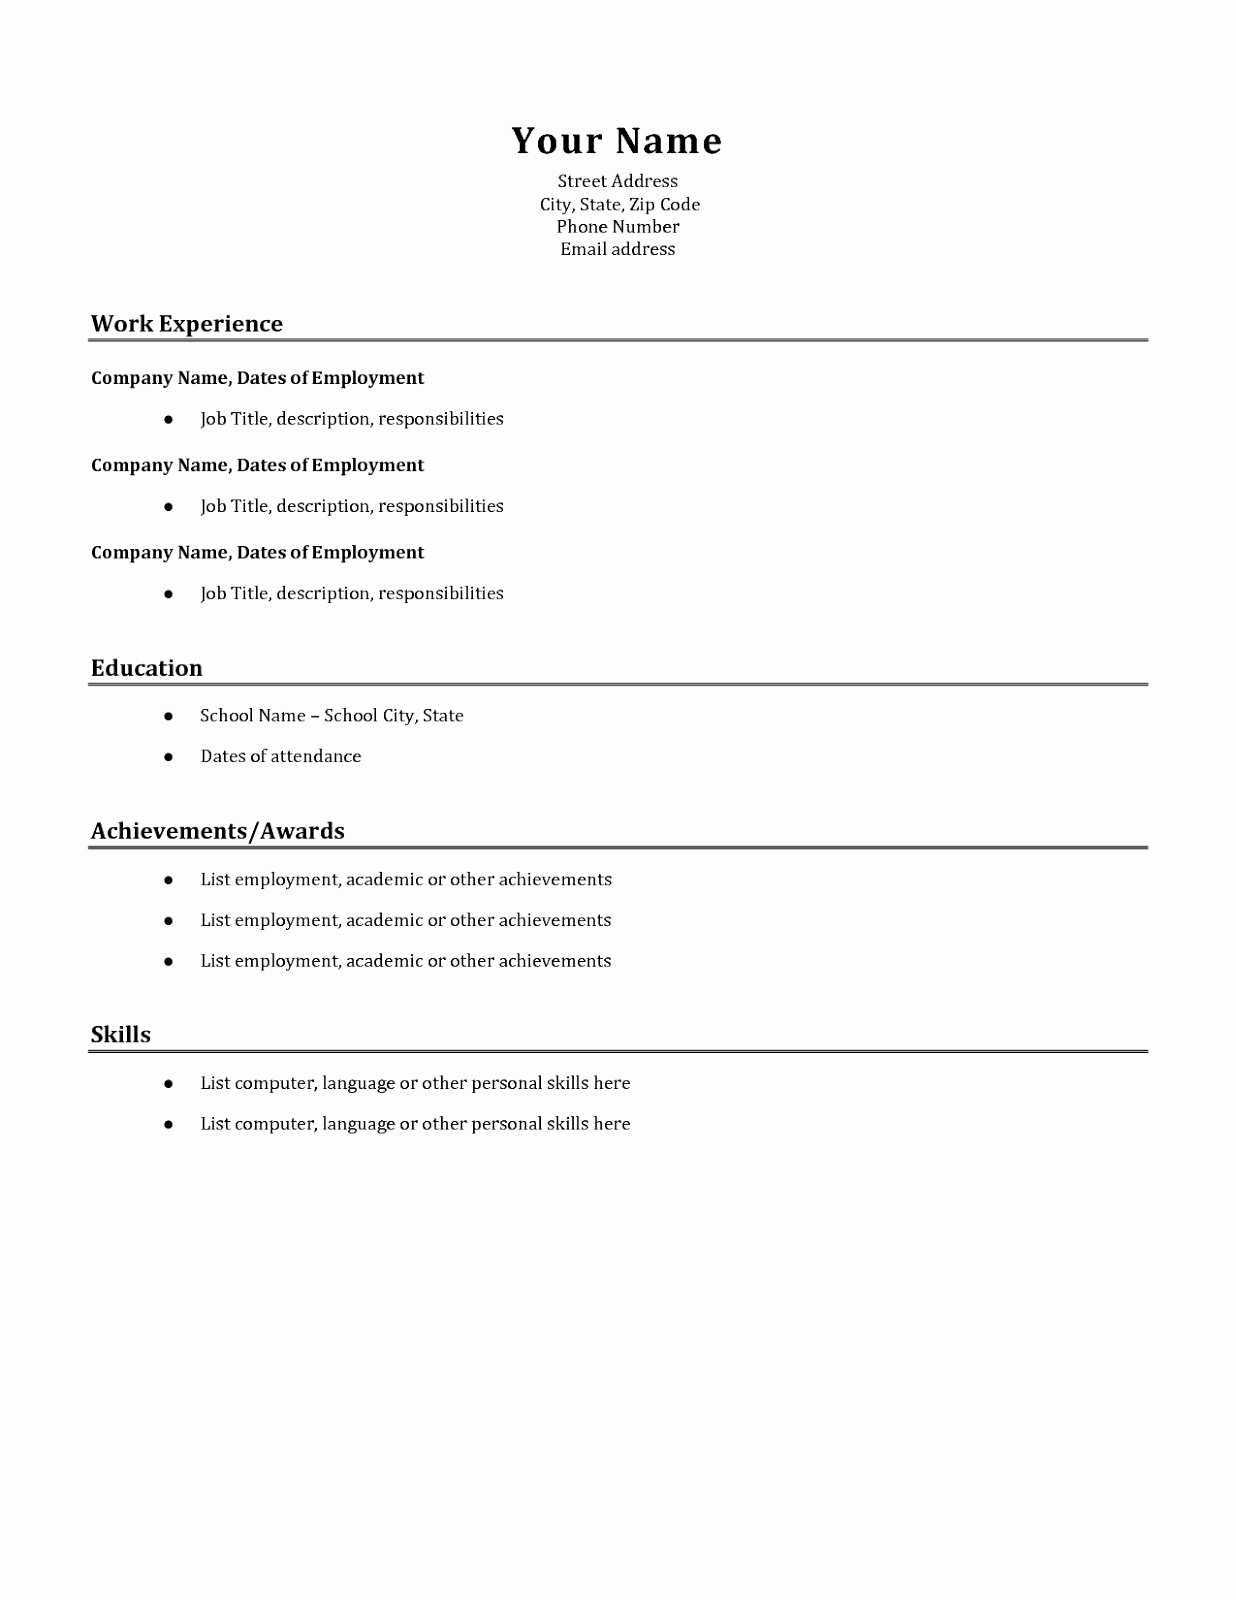 Simple Resume Examples for Jobs New Sample Of Simple Resume